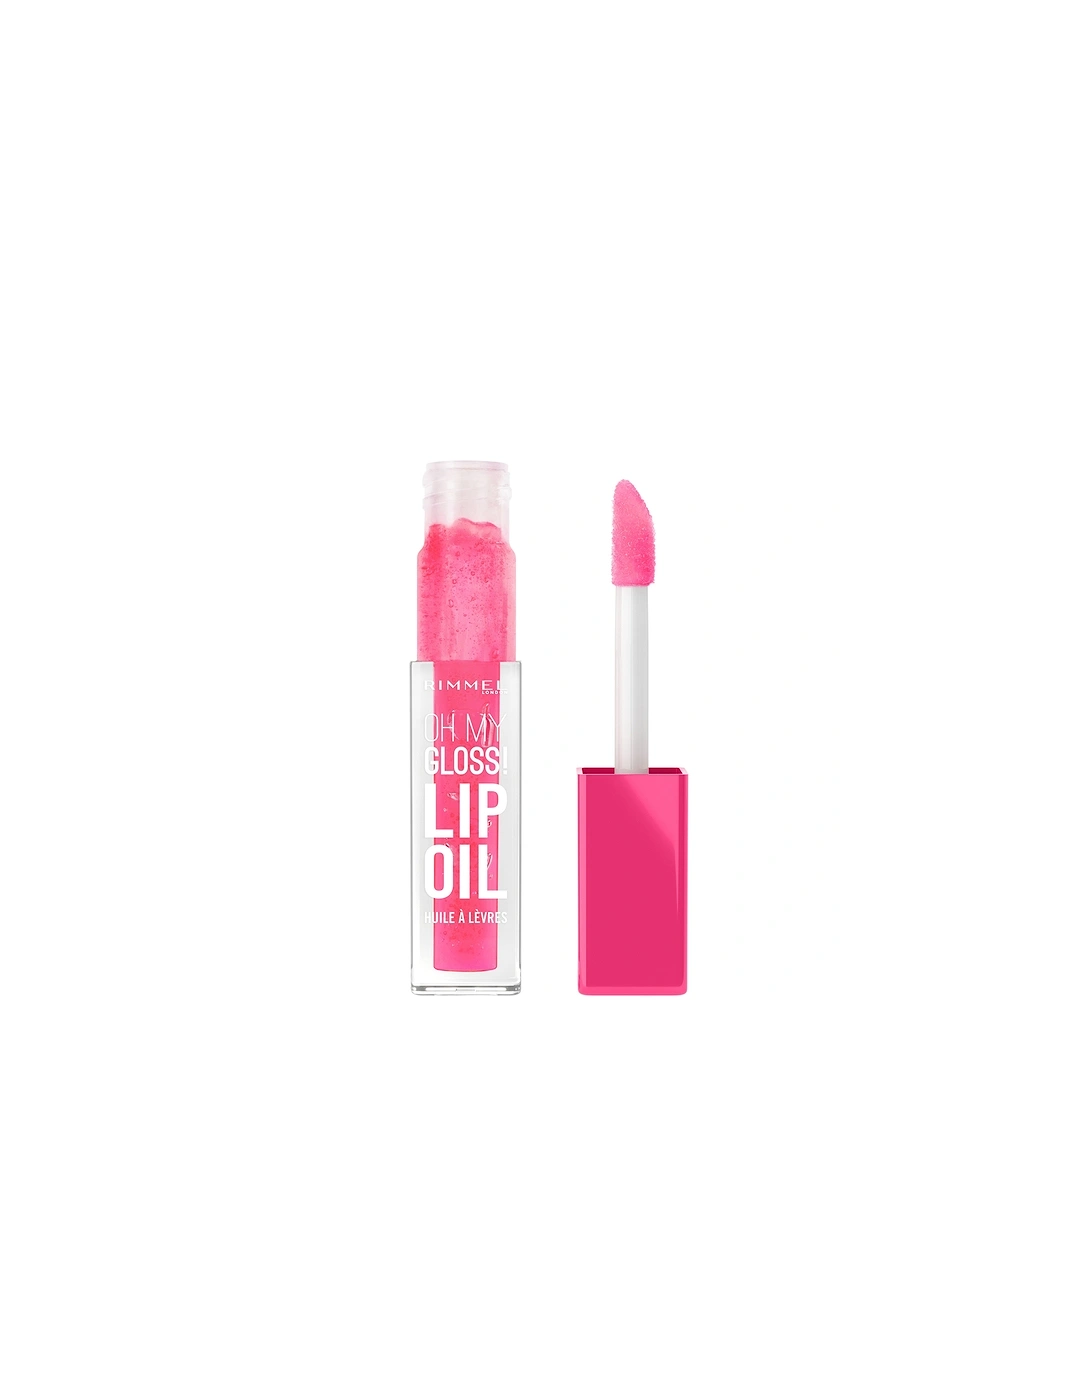 Oh My Gloss! Lip Oil - 004 - Vivid Red, 6 of 5